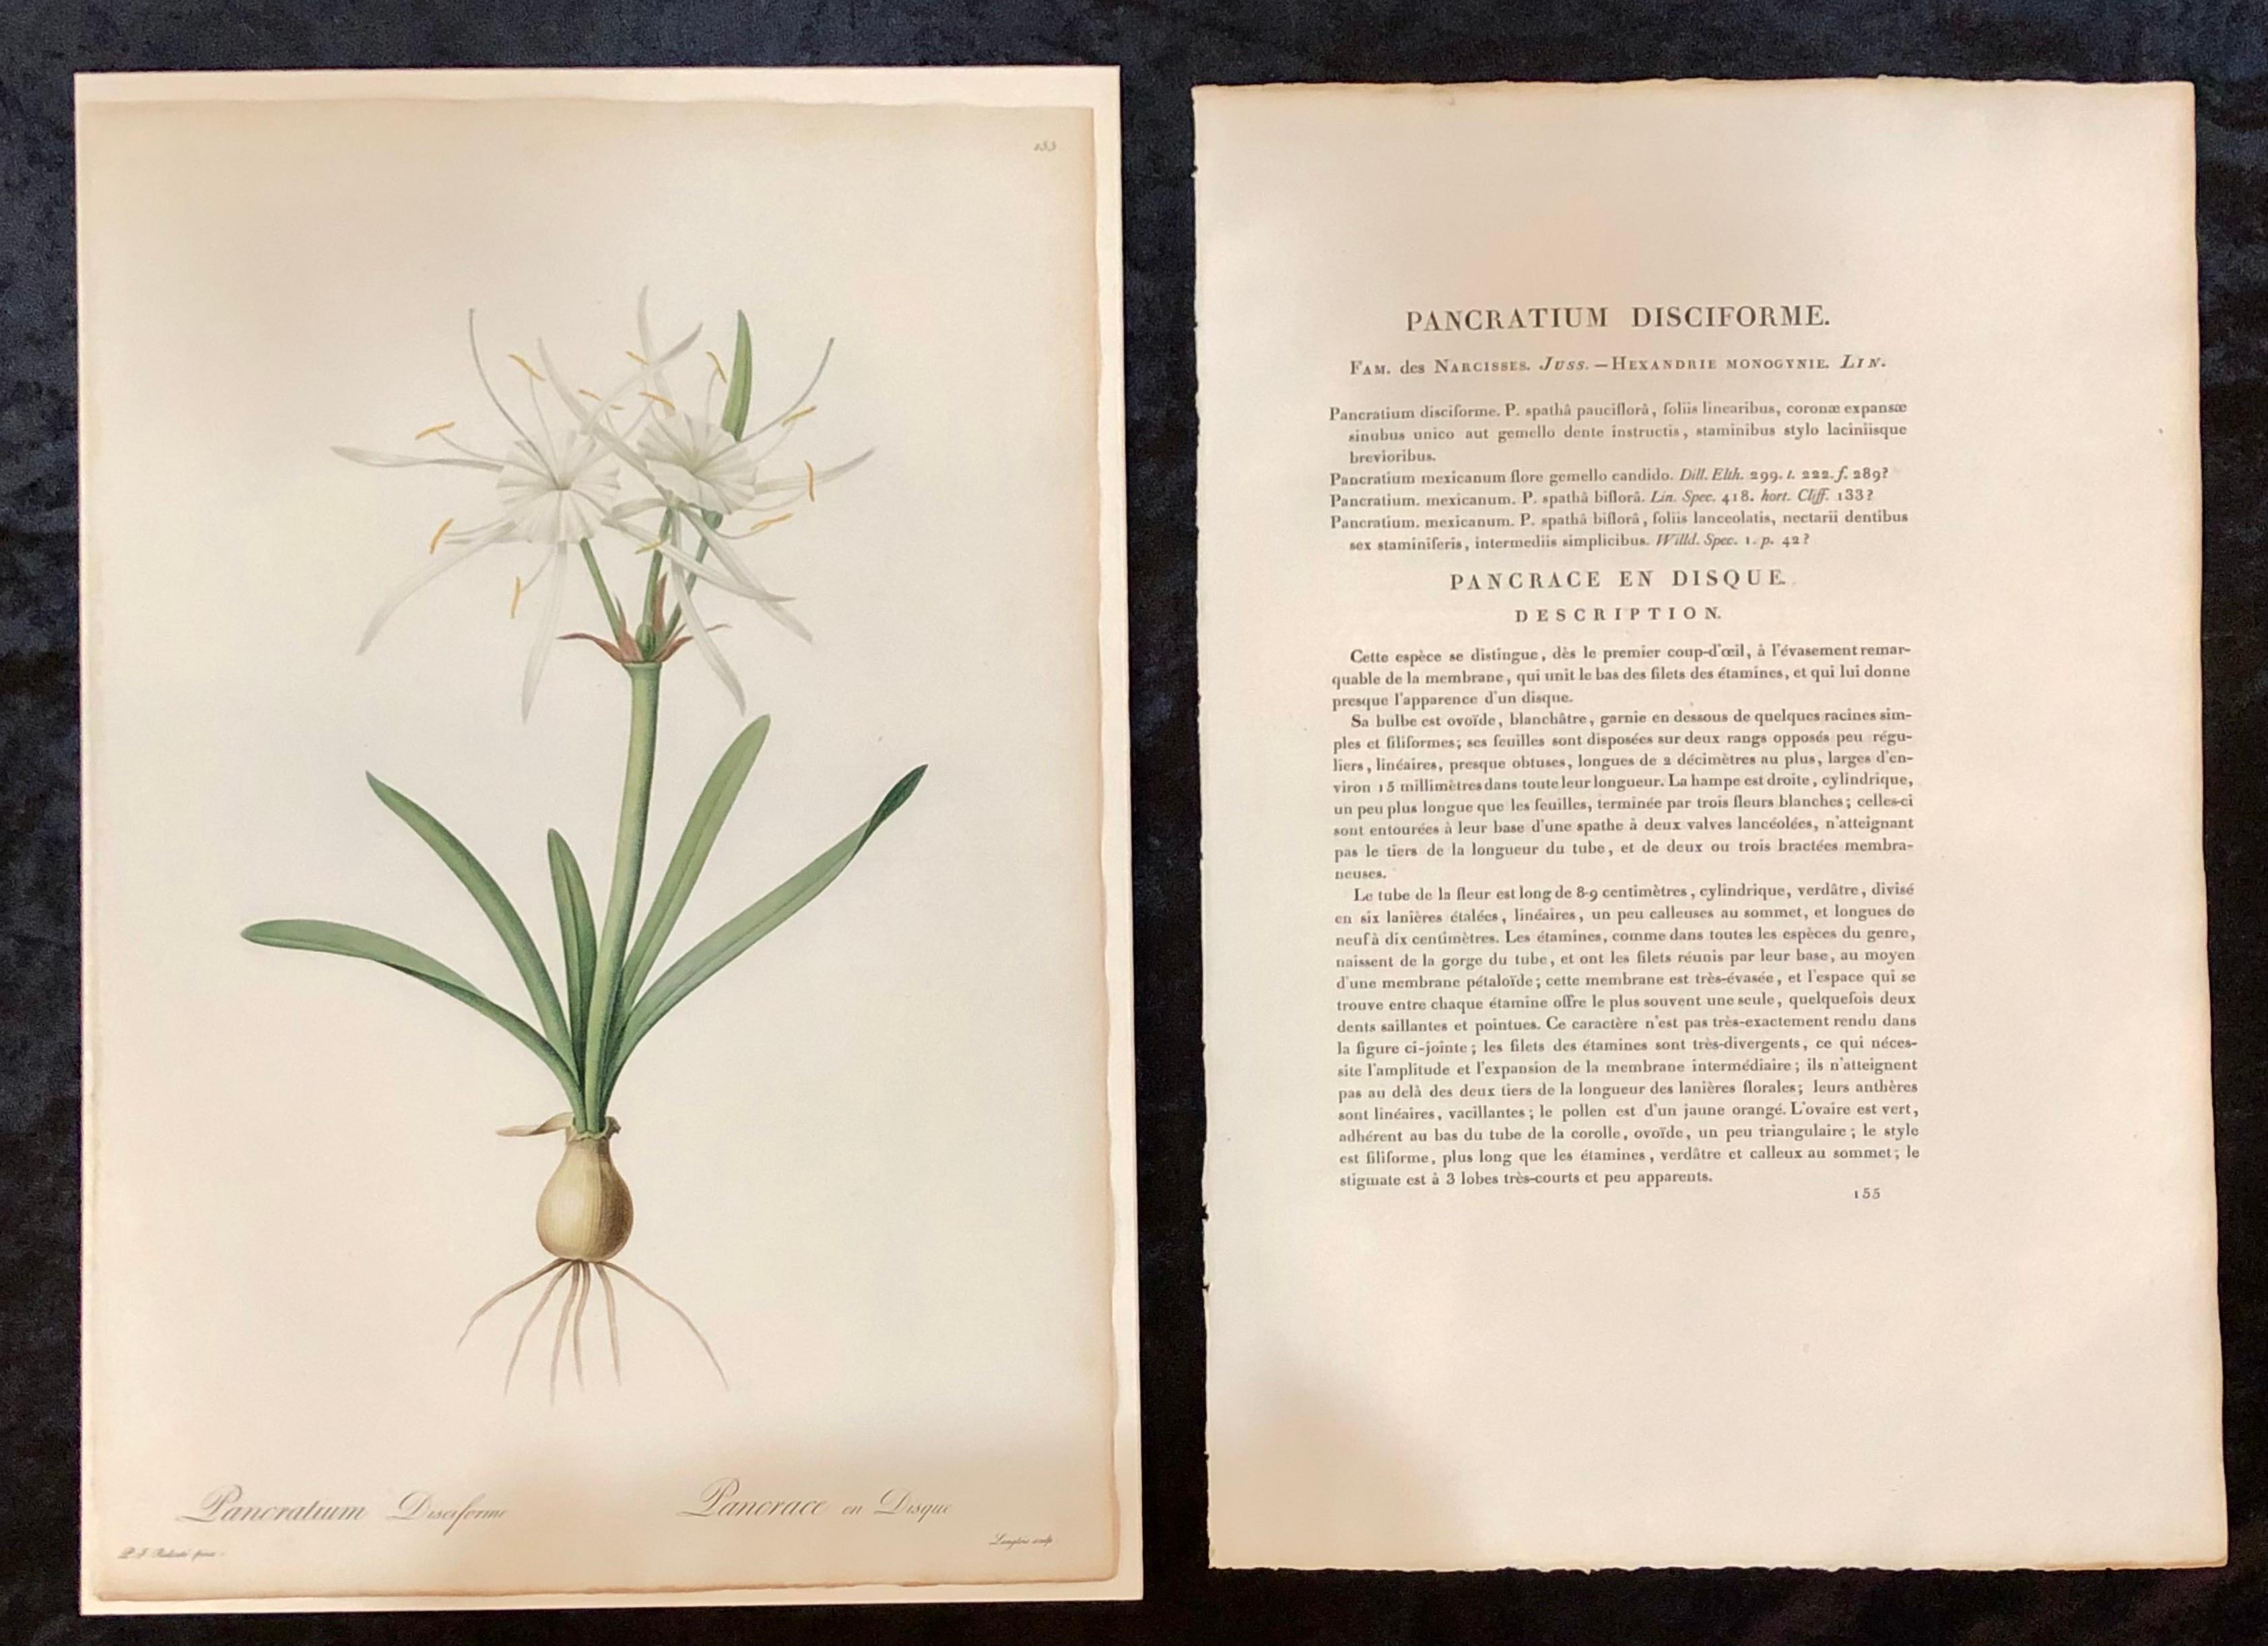 Minimalist Pancratium Disciforme Hand Colored Engraving Signed P.J. Redoute & Numbered